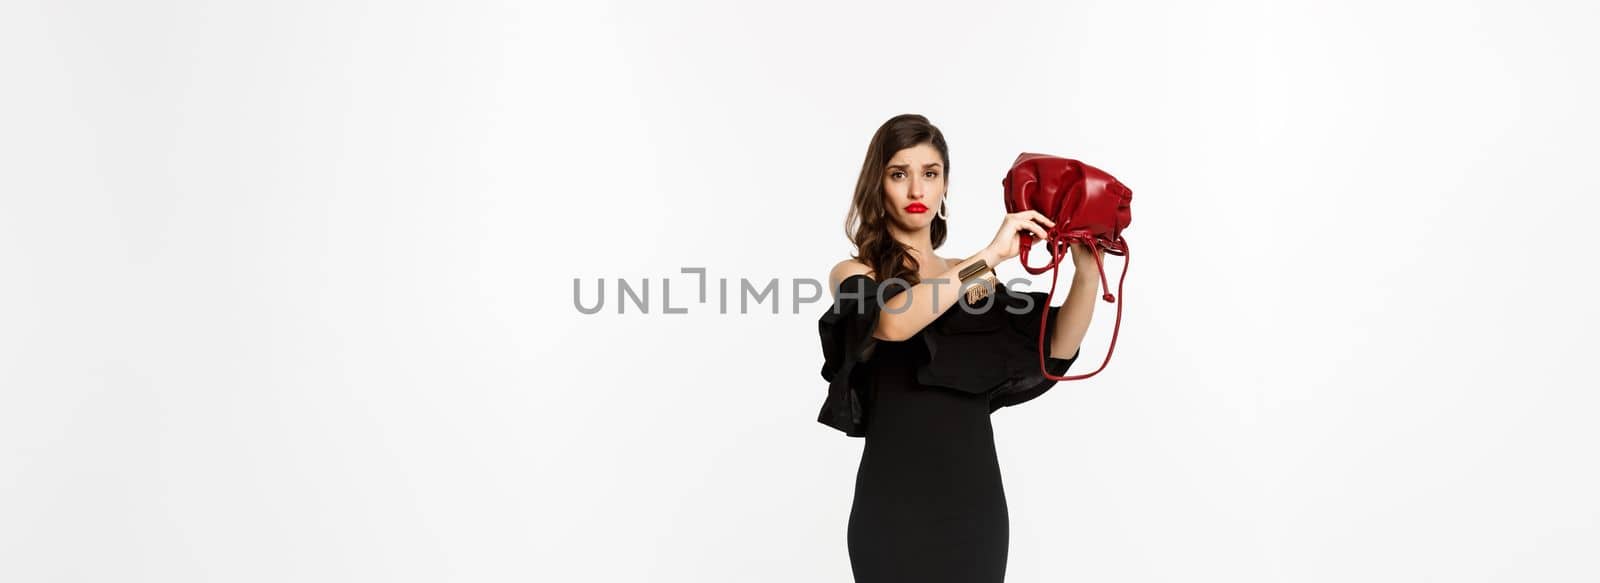 Beauty and fashion concept. Full length of sad young woman in black dress and high heels showing empty purse, sulking disappointed, standing over white background.